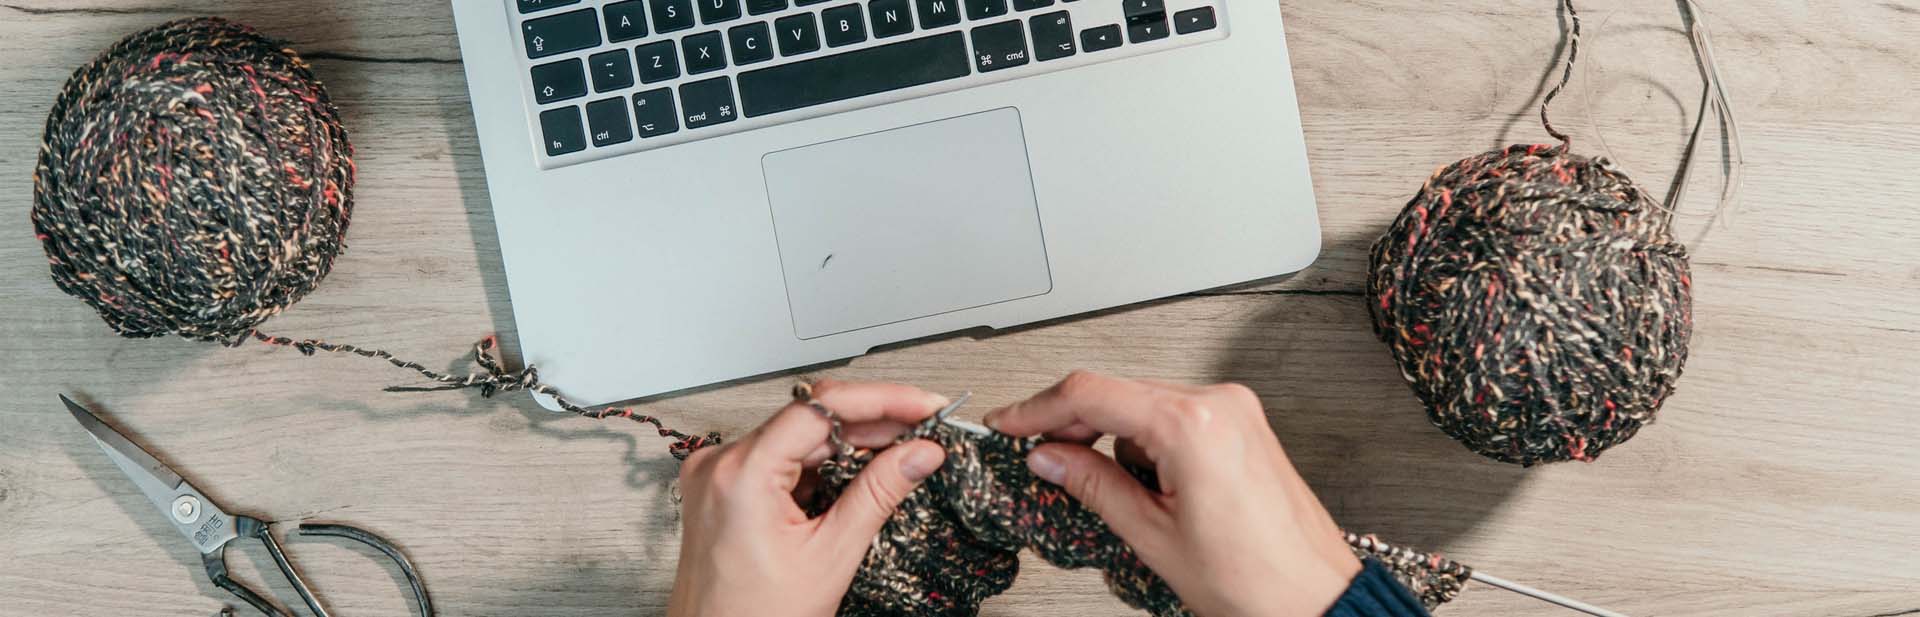 person knitting yarn in front of laptop computer